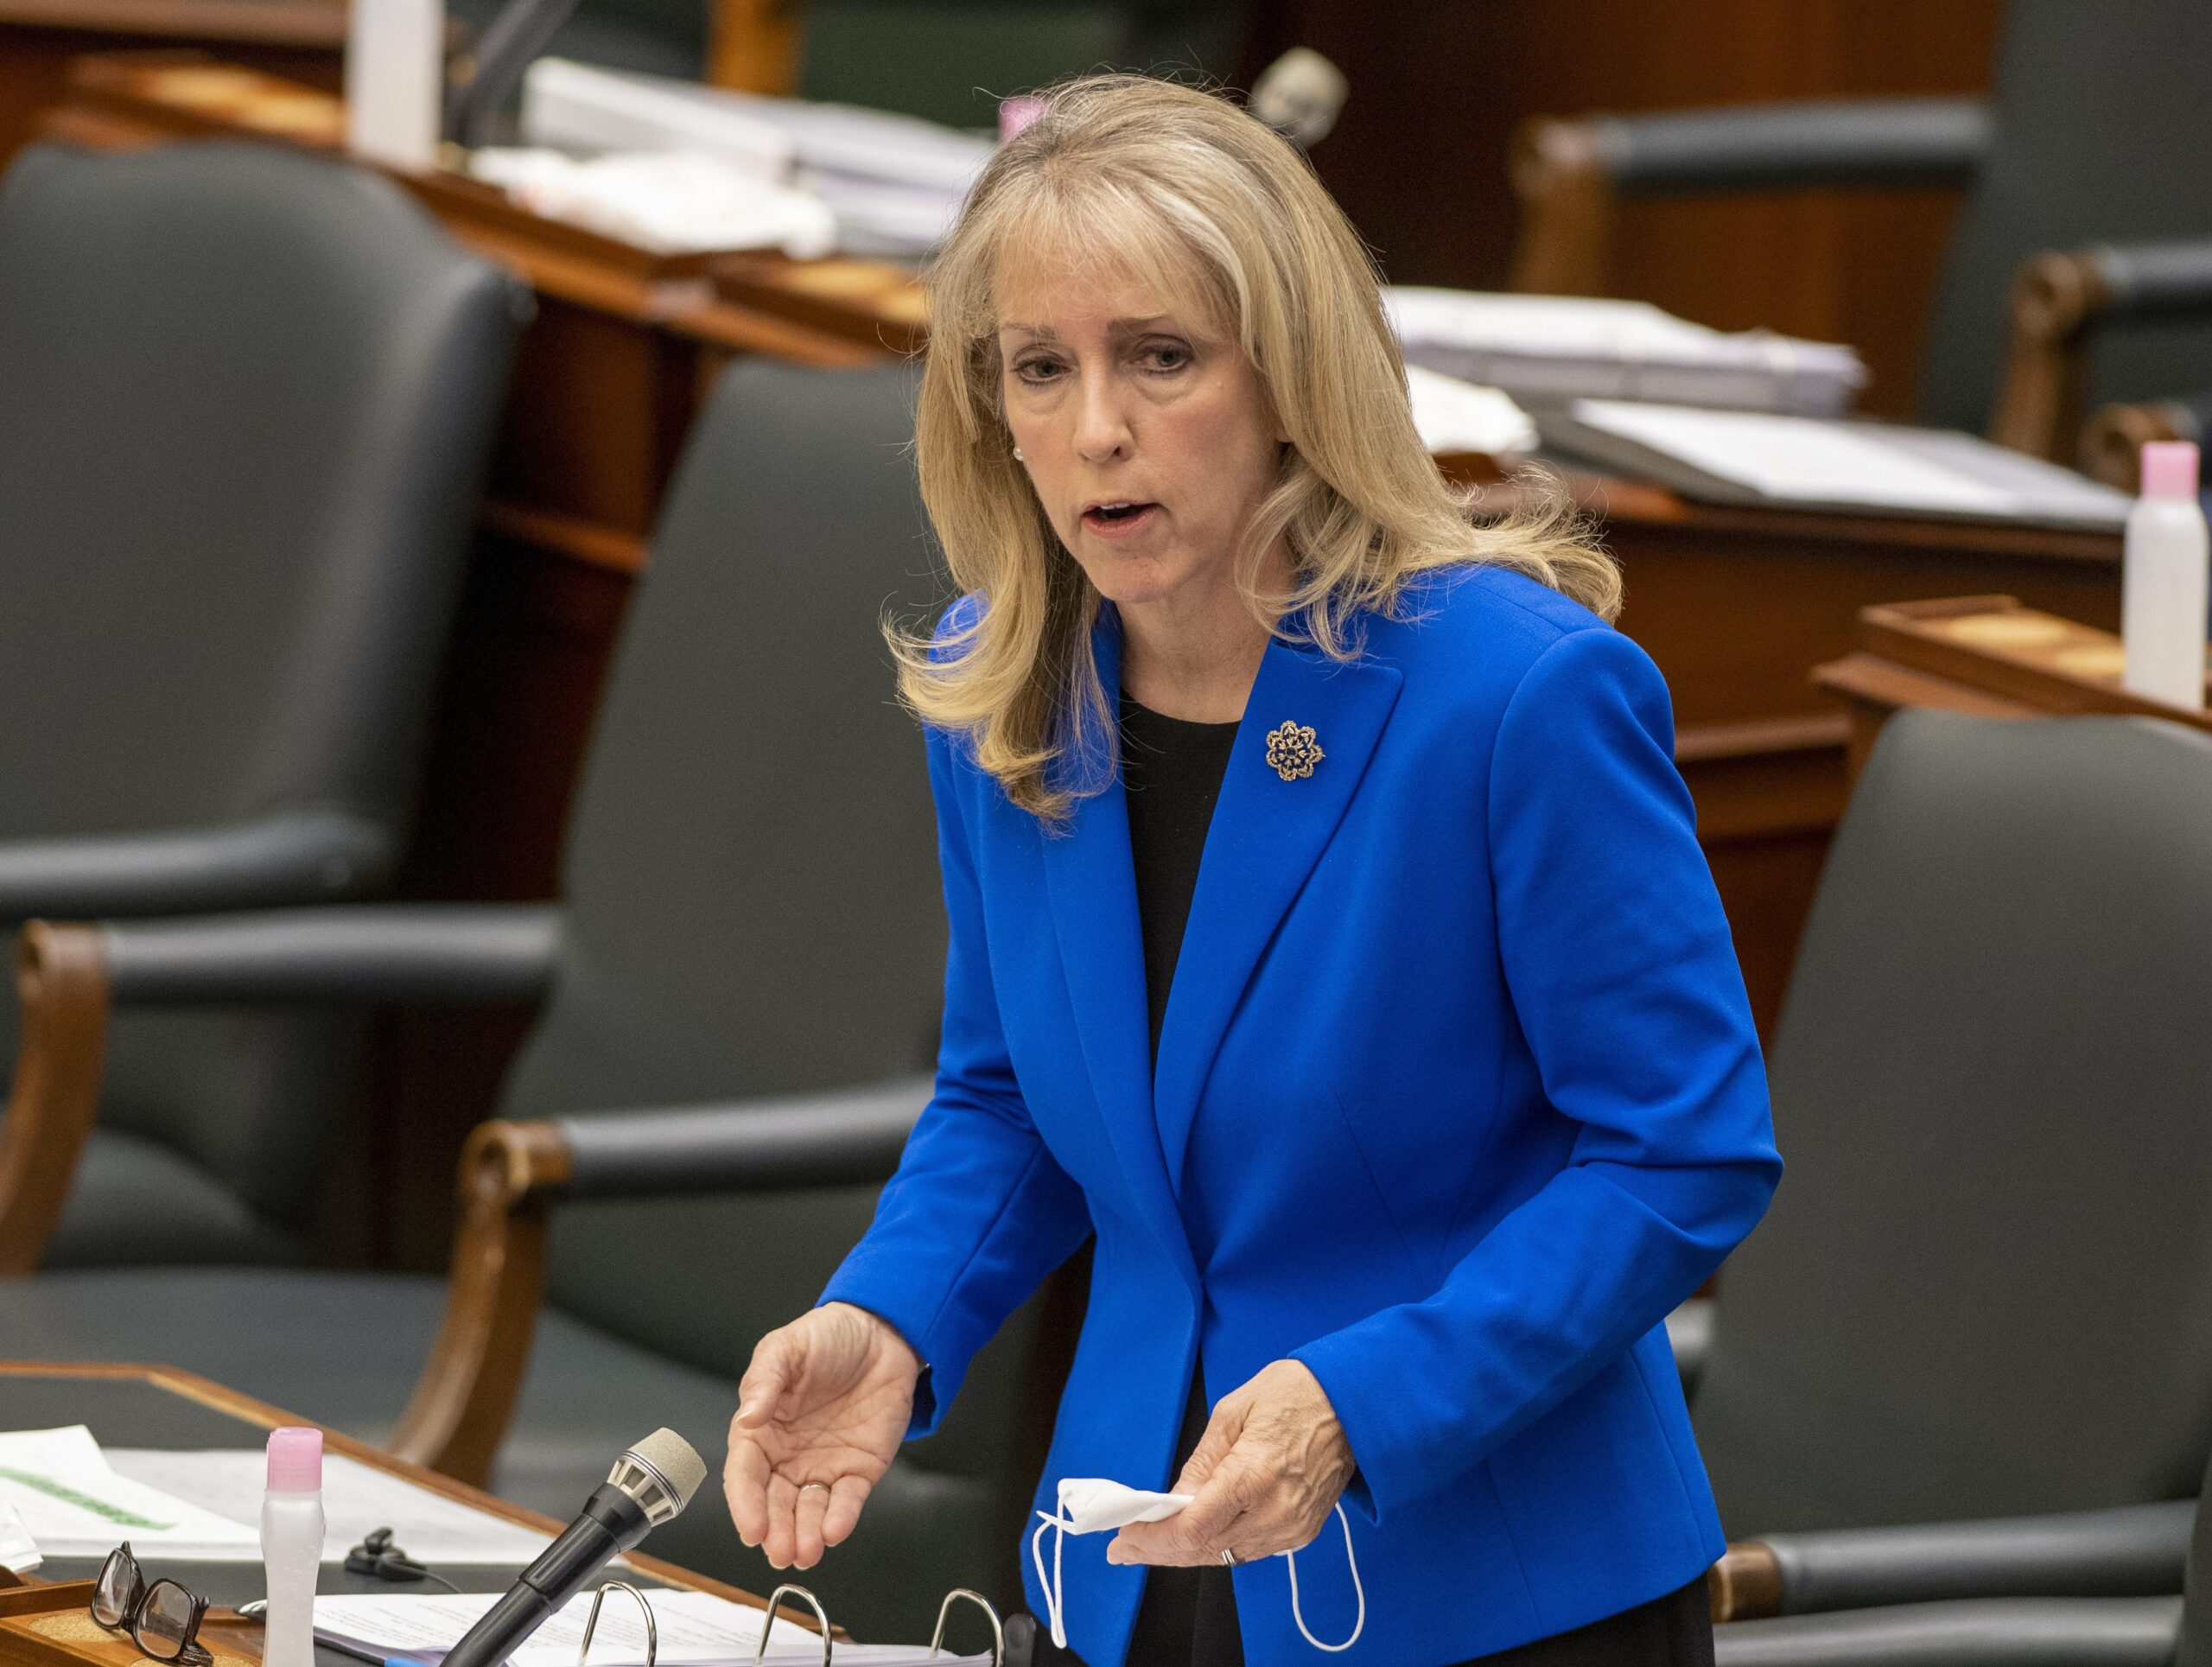 NDP MPPs to go on two-week ODSP diet